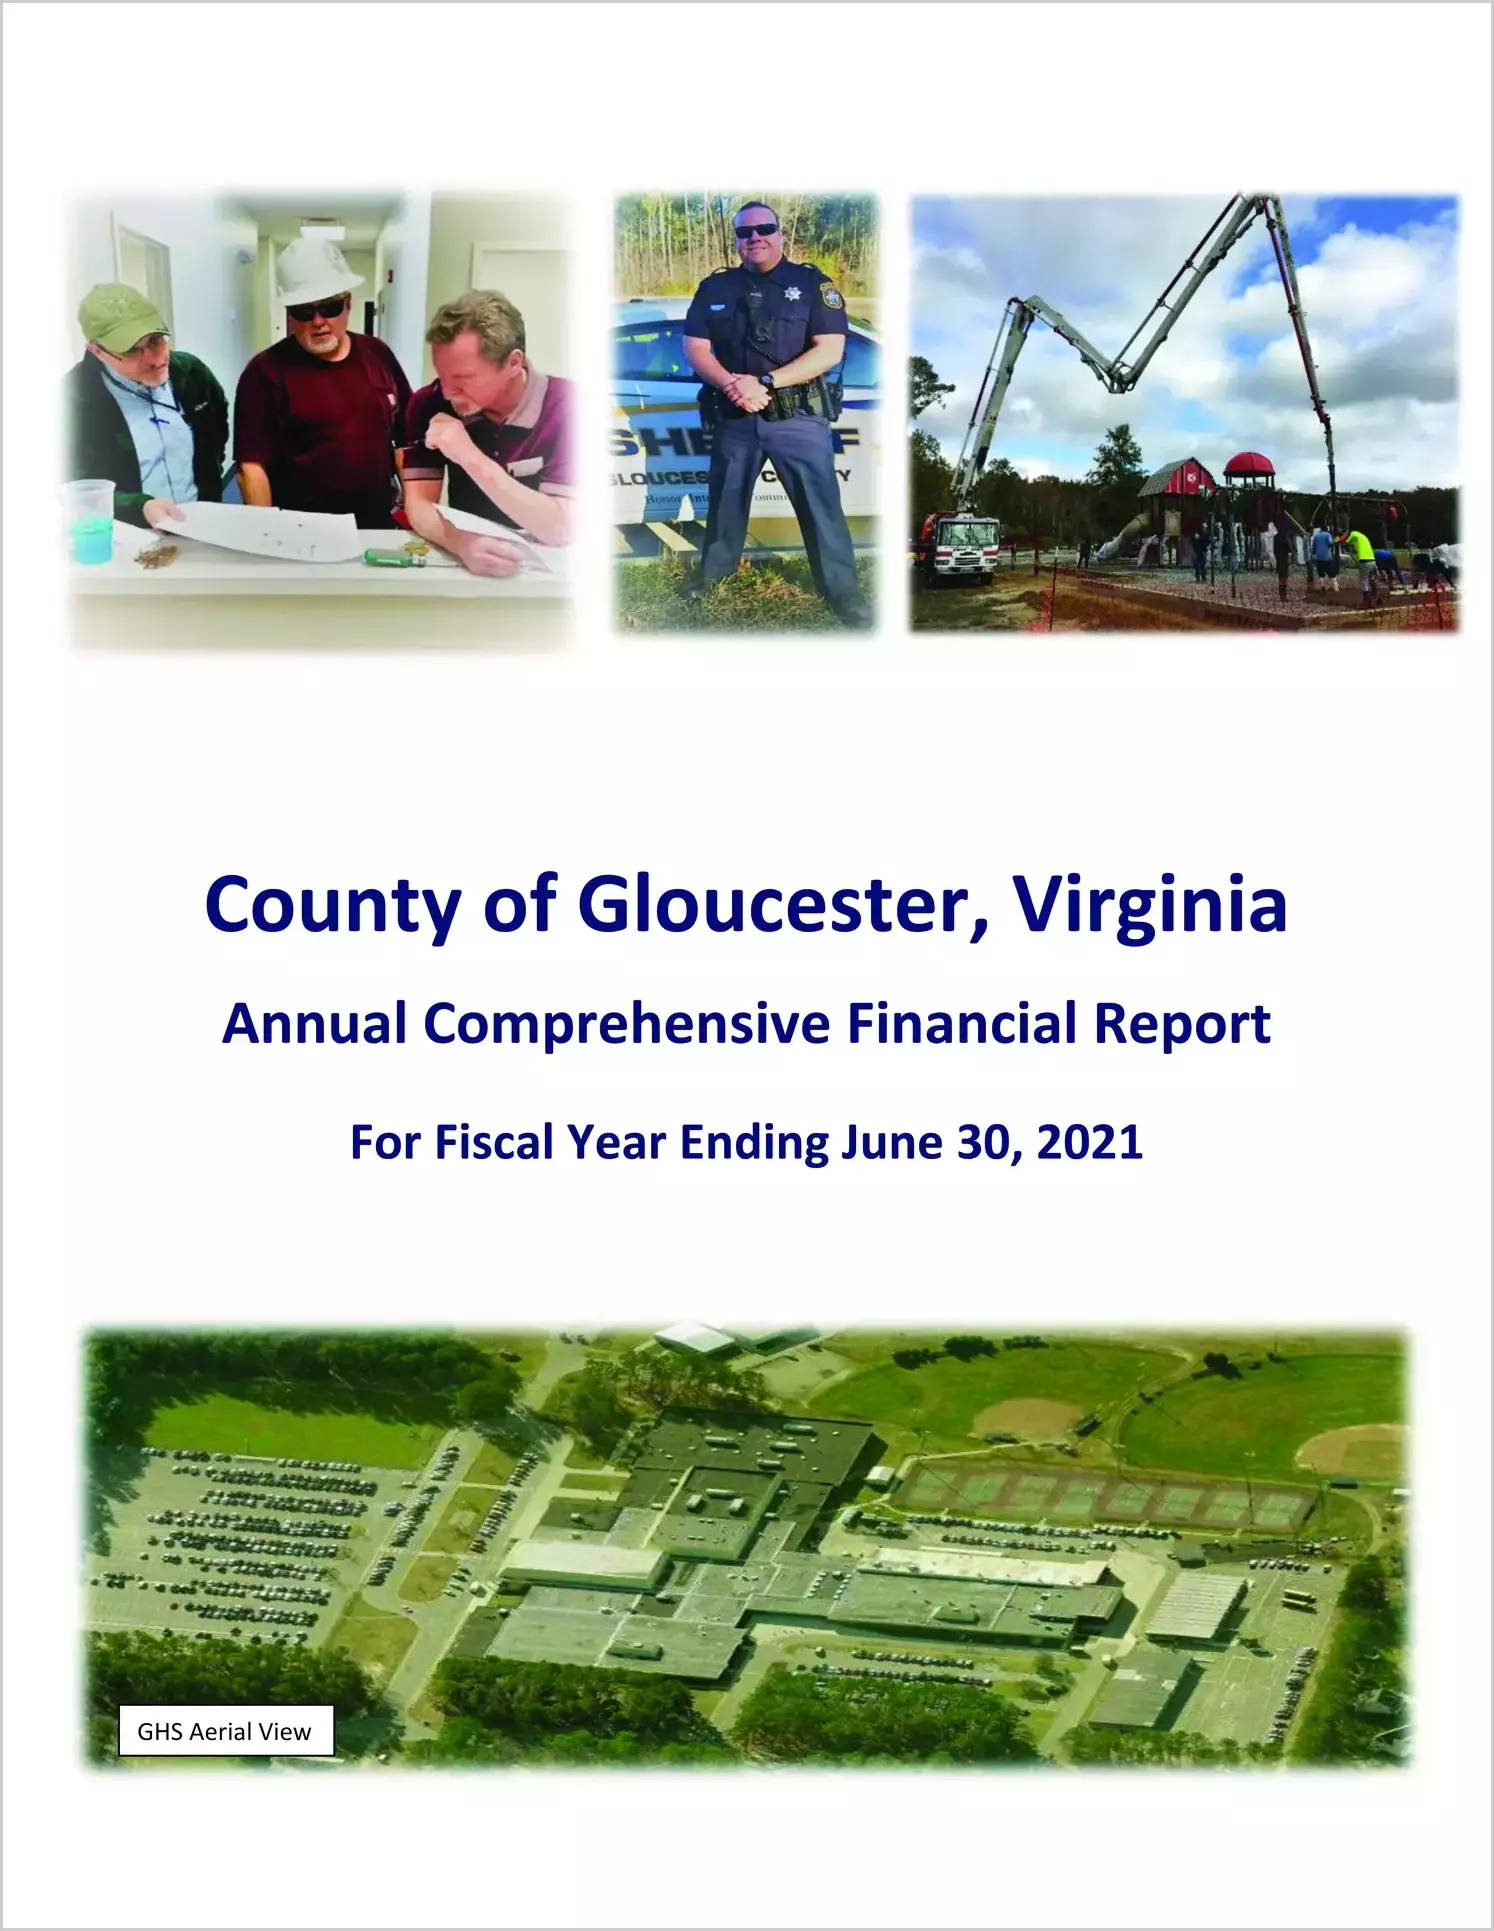 2021 Annual Financial Report for County of Gloucester